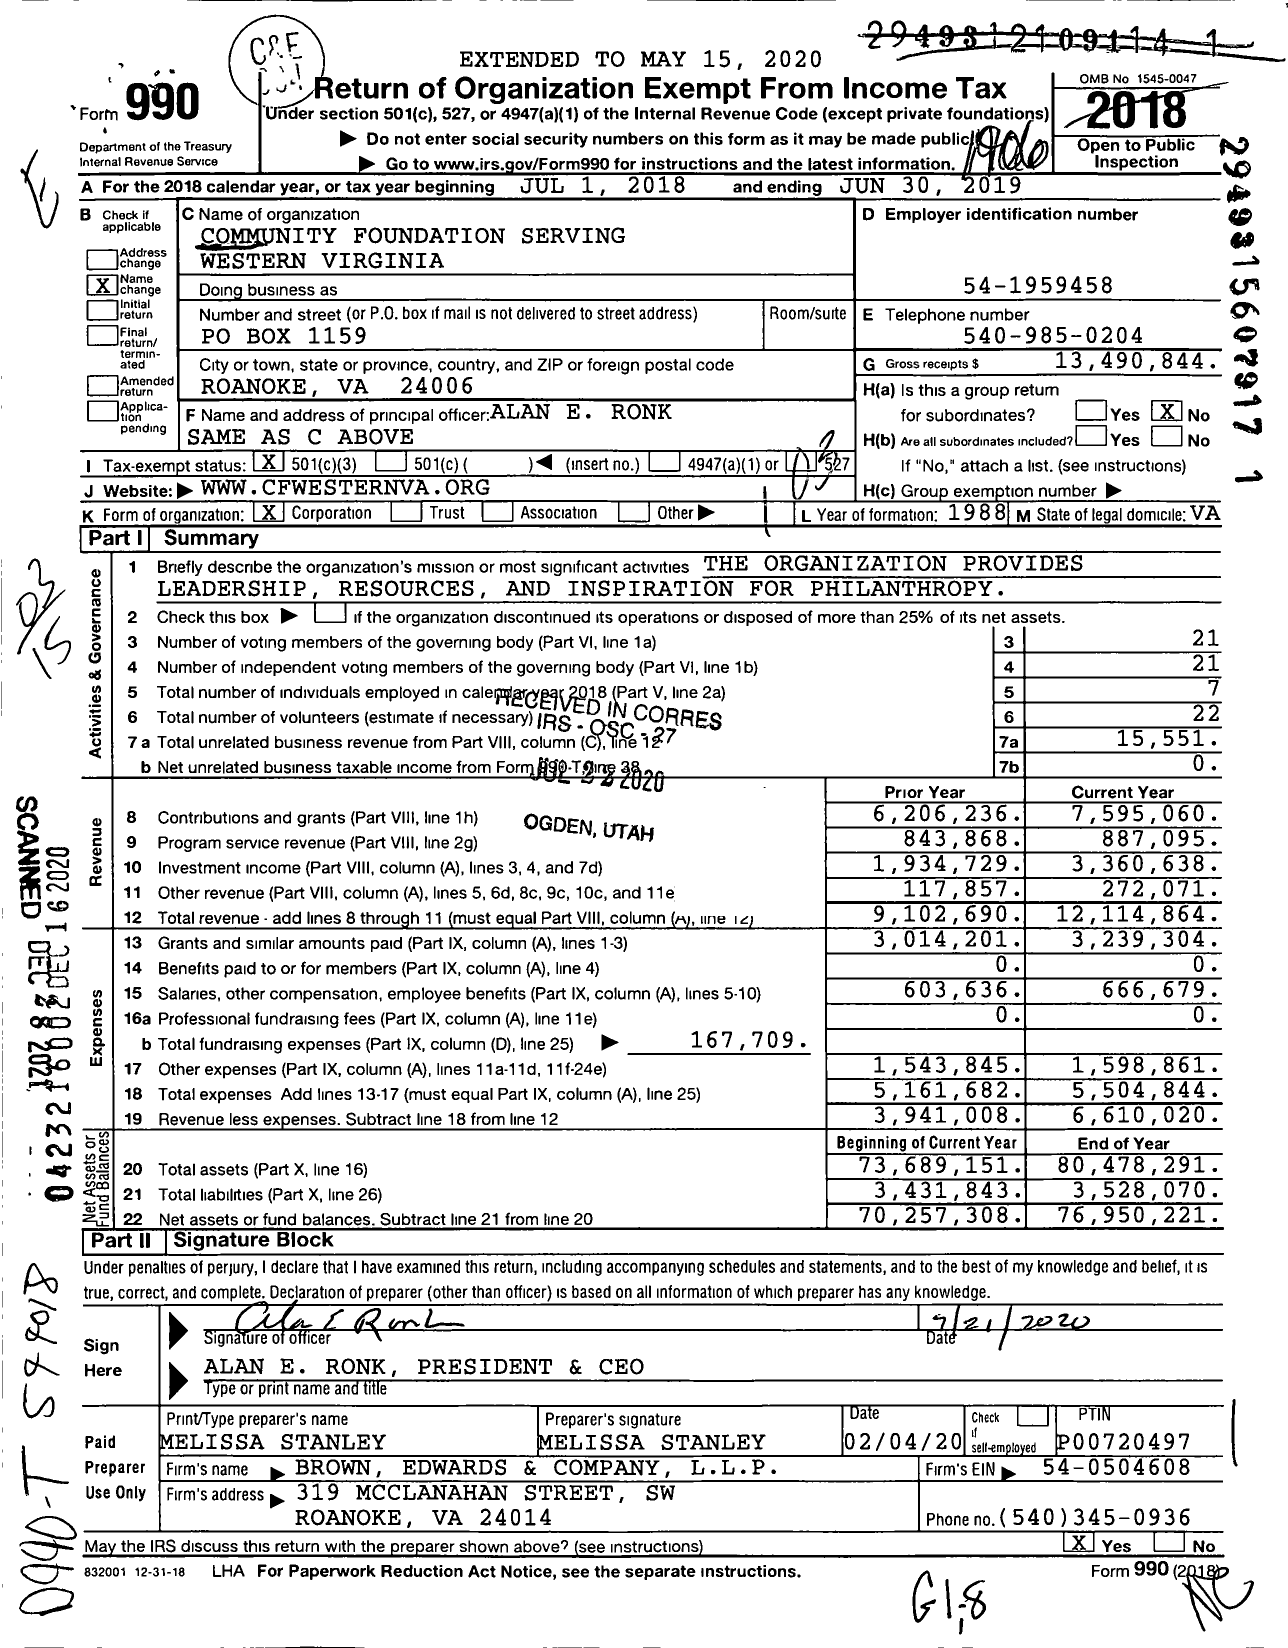 Image of first page of 2018 Form 990 for Community Foundation Serving Western Virginia